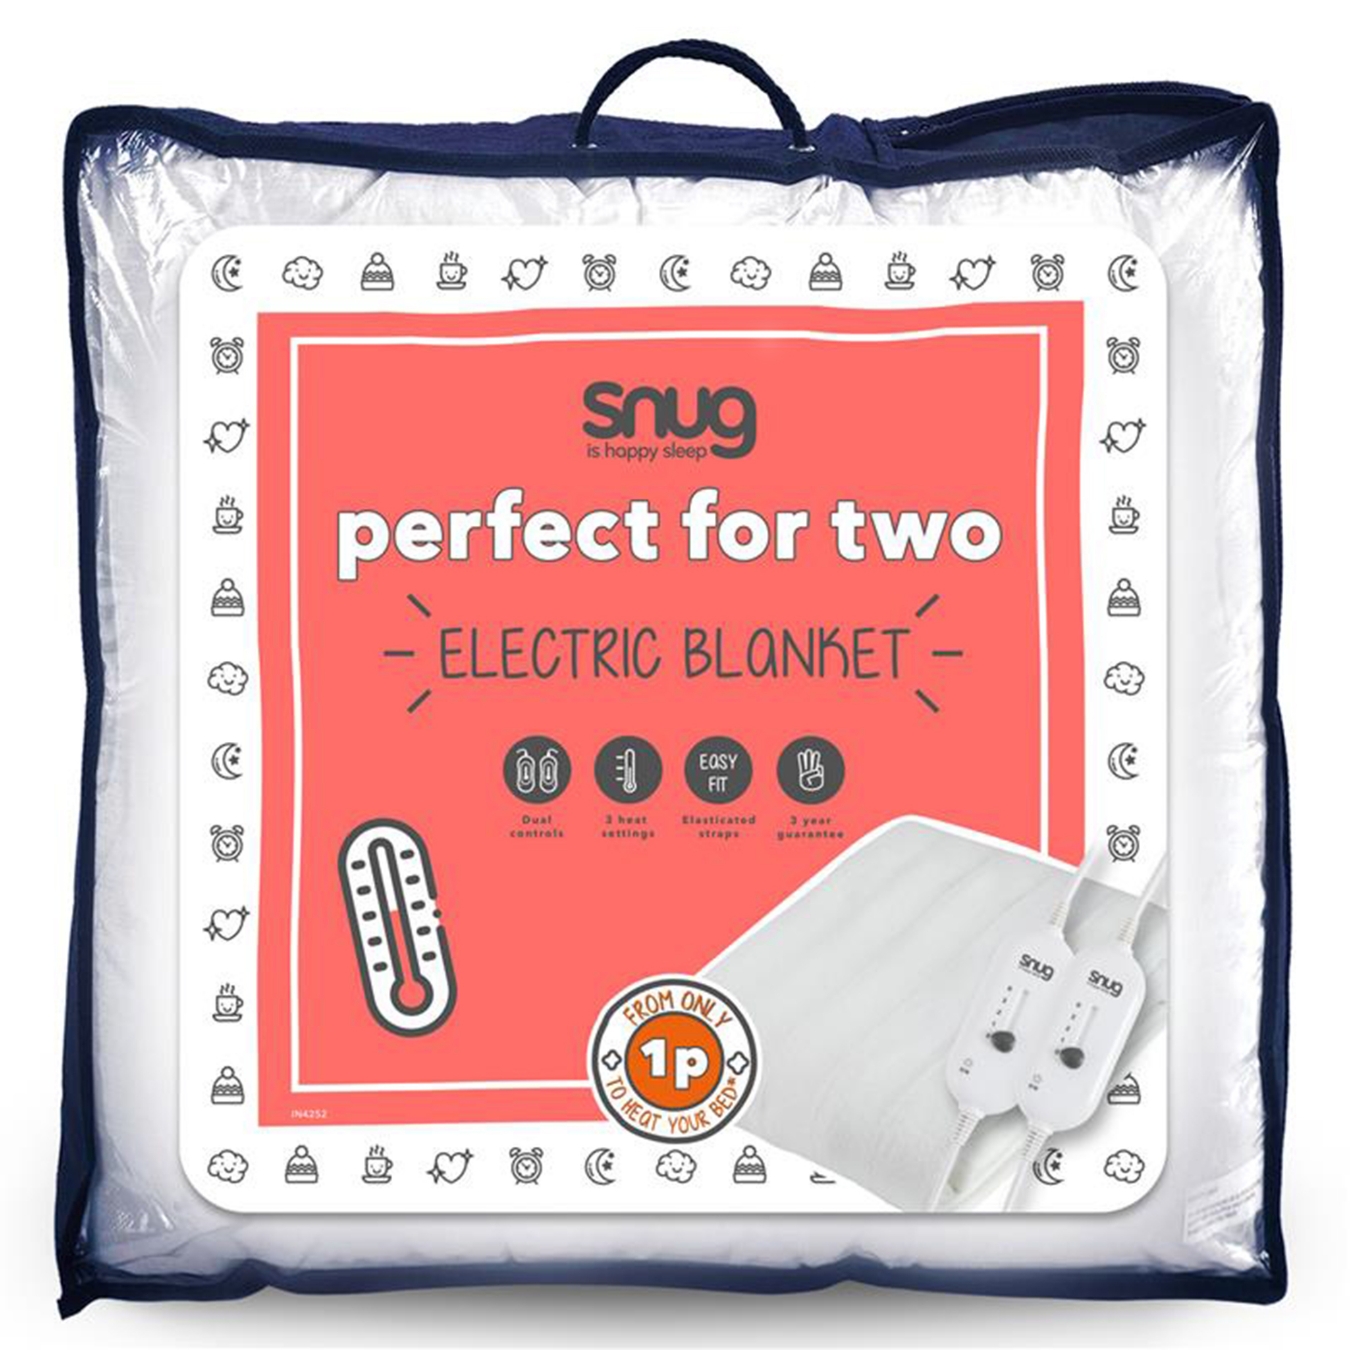 View Snug Snuggle Up Perfect for Two Electric Blanket Double information